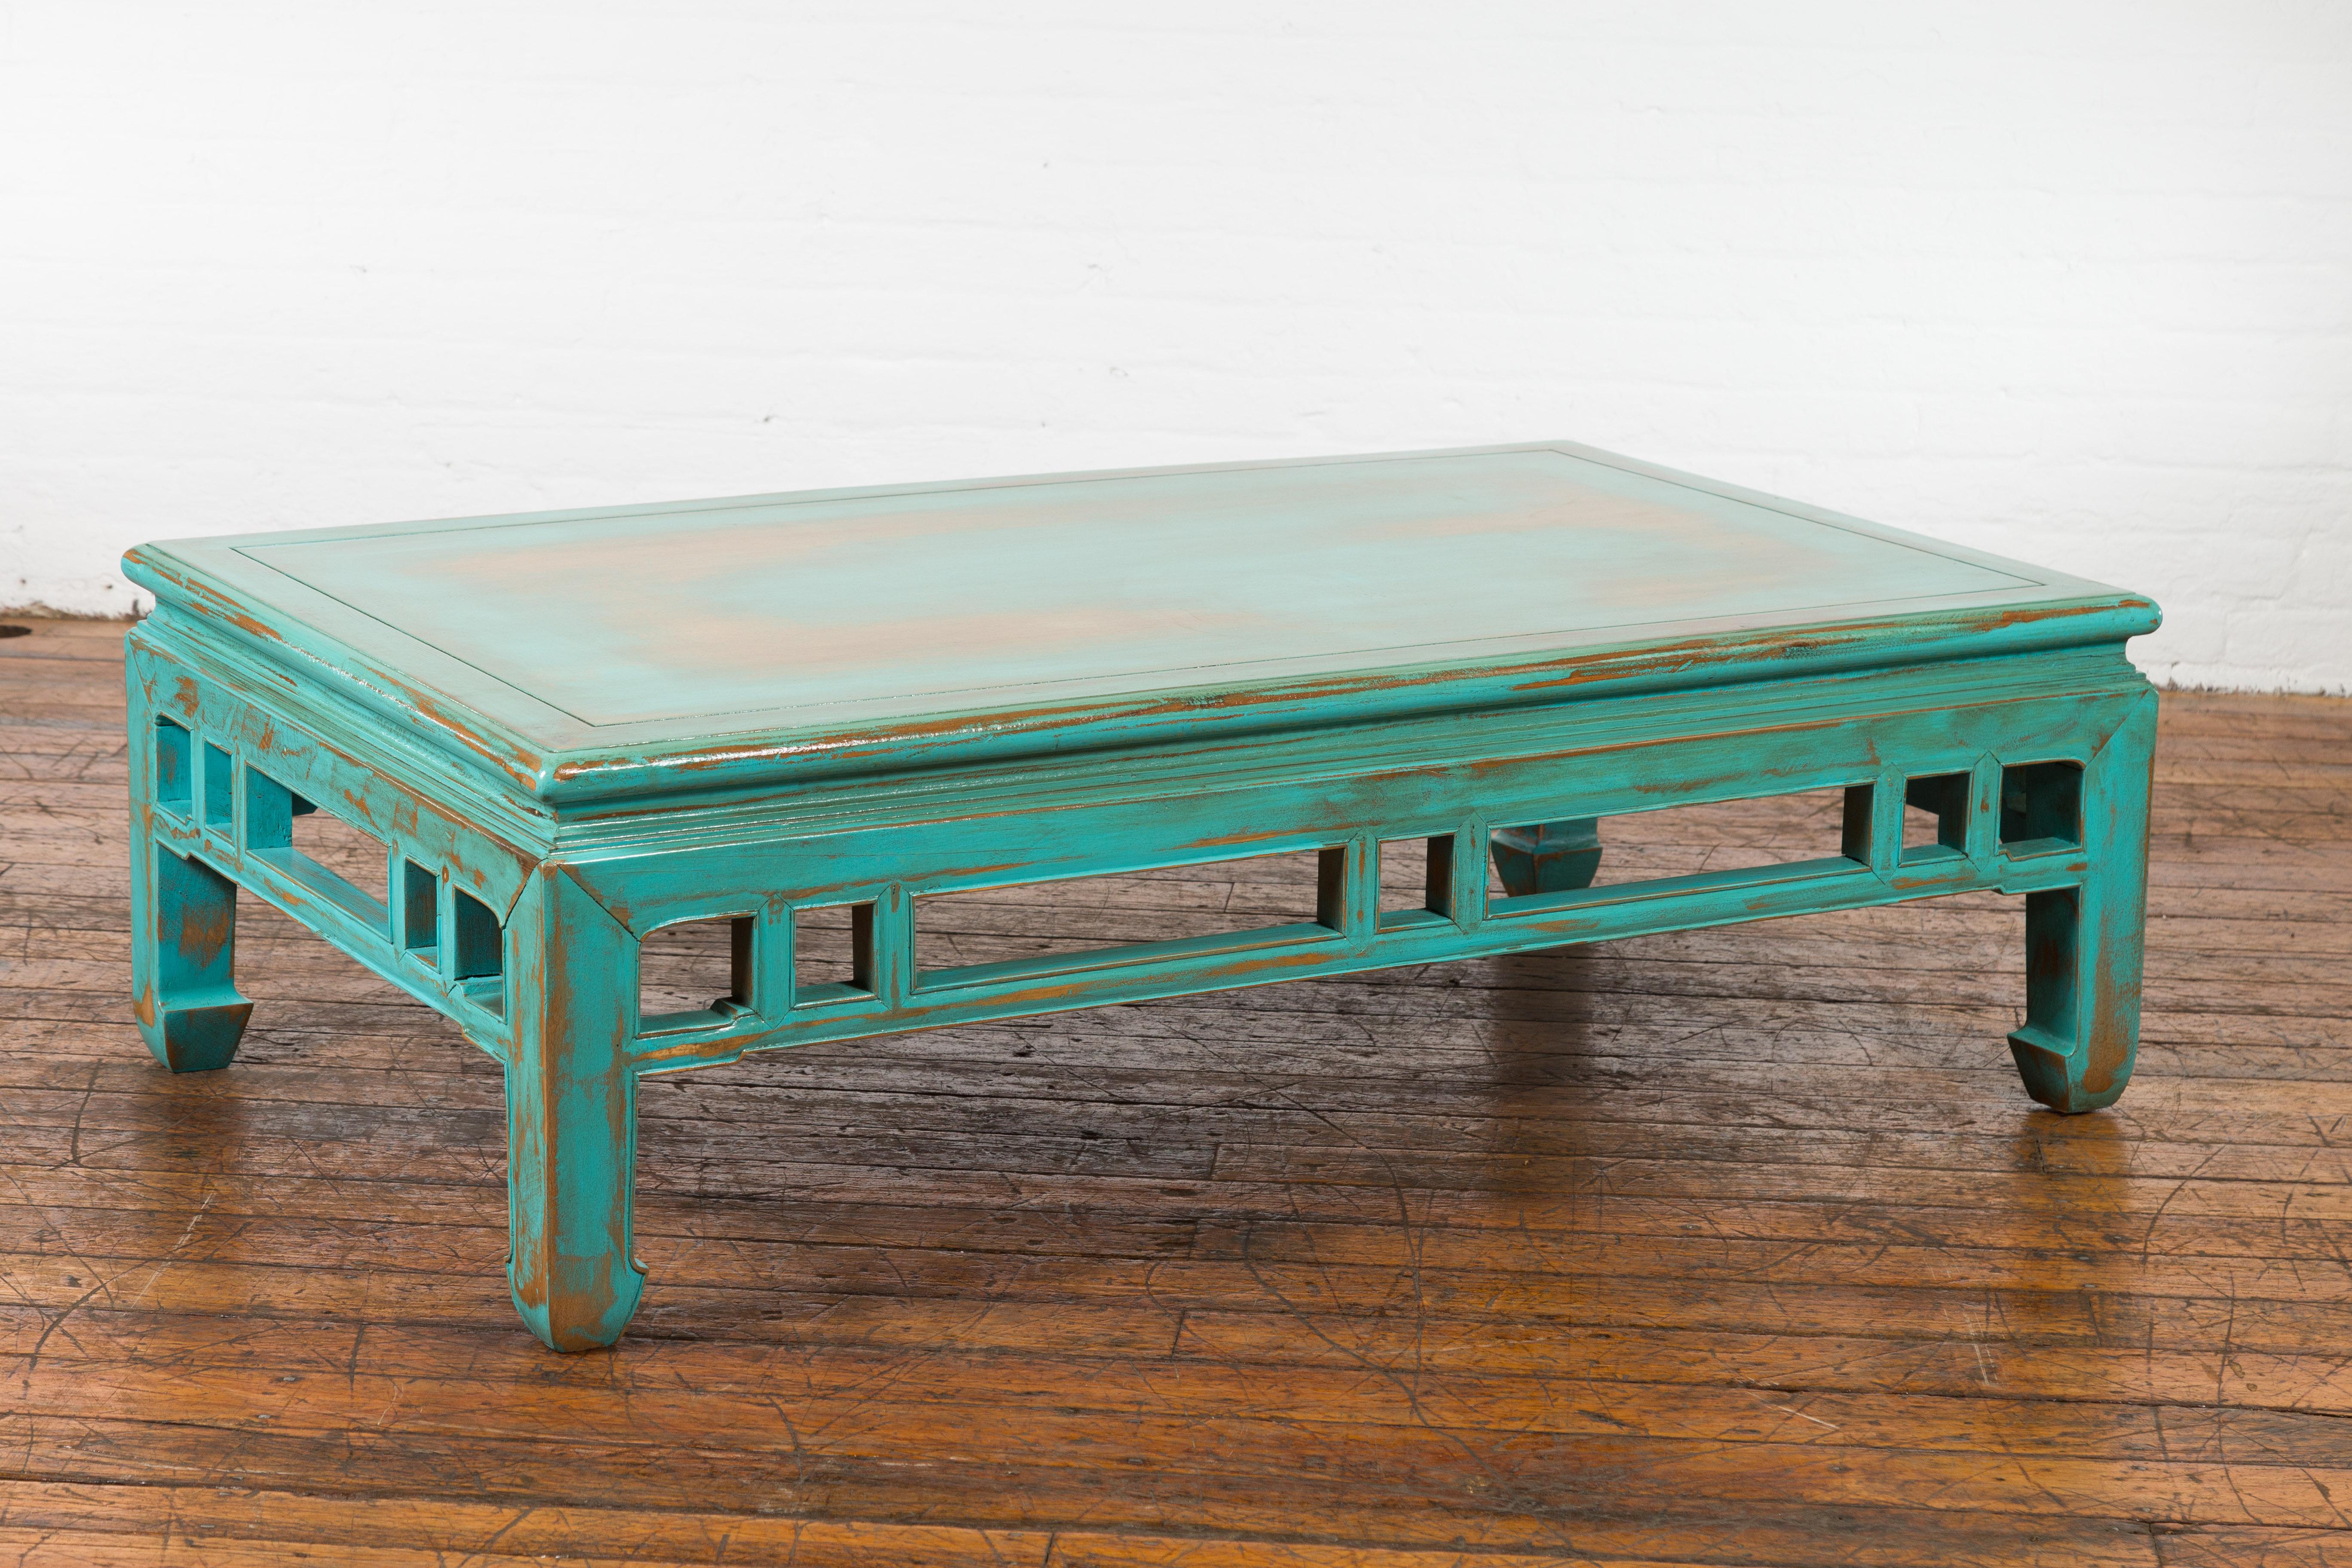 Chinese Qing Dynasty Low Kang Coffee Table with Custom Aqua Teal Lacquer For Sale 8